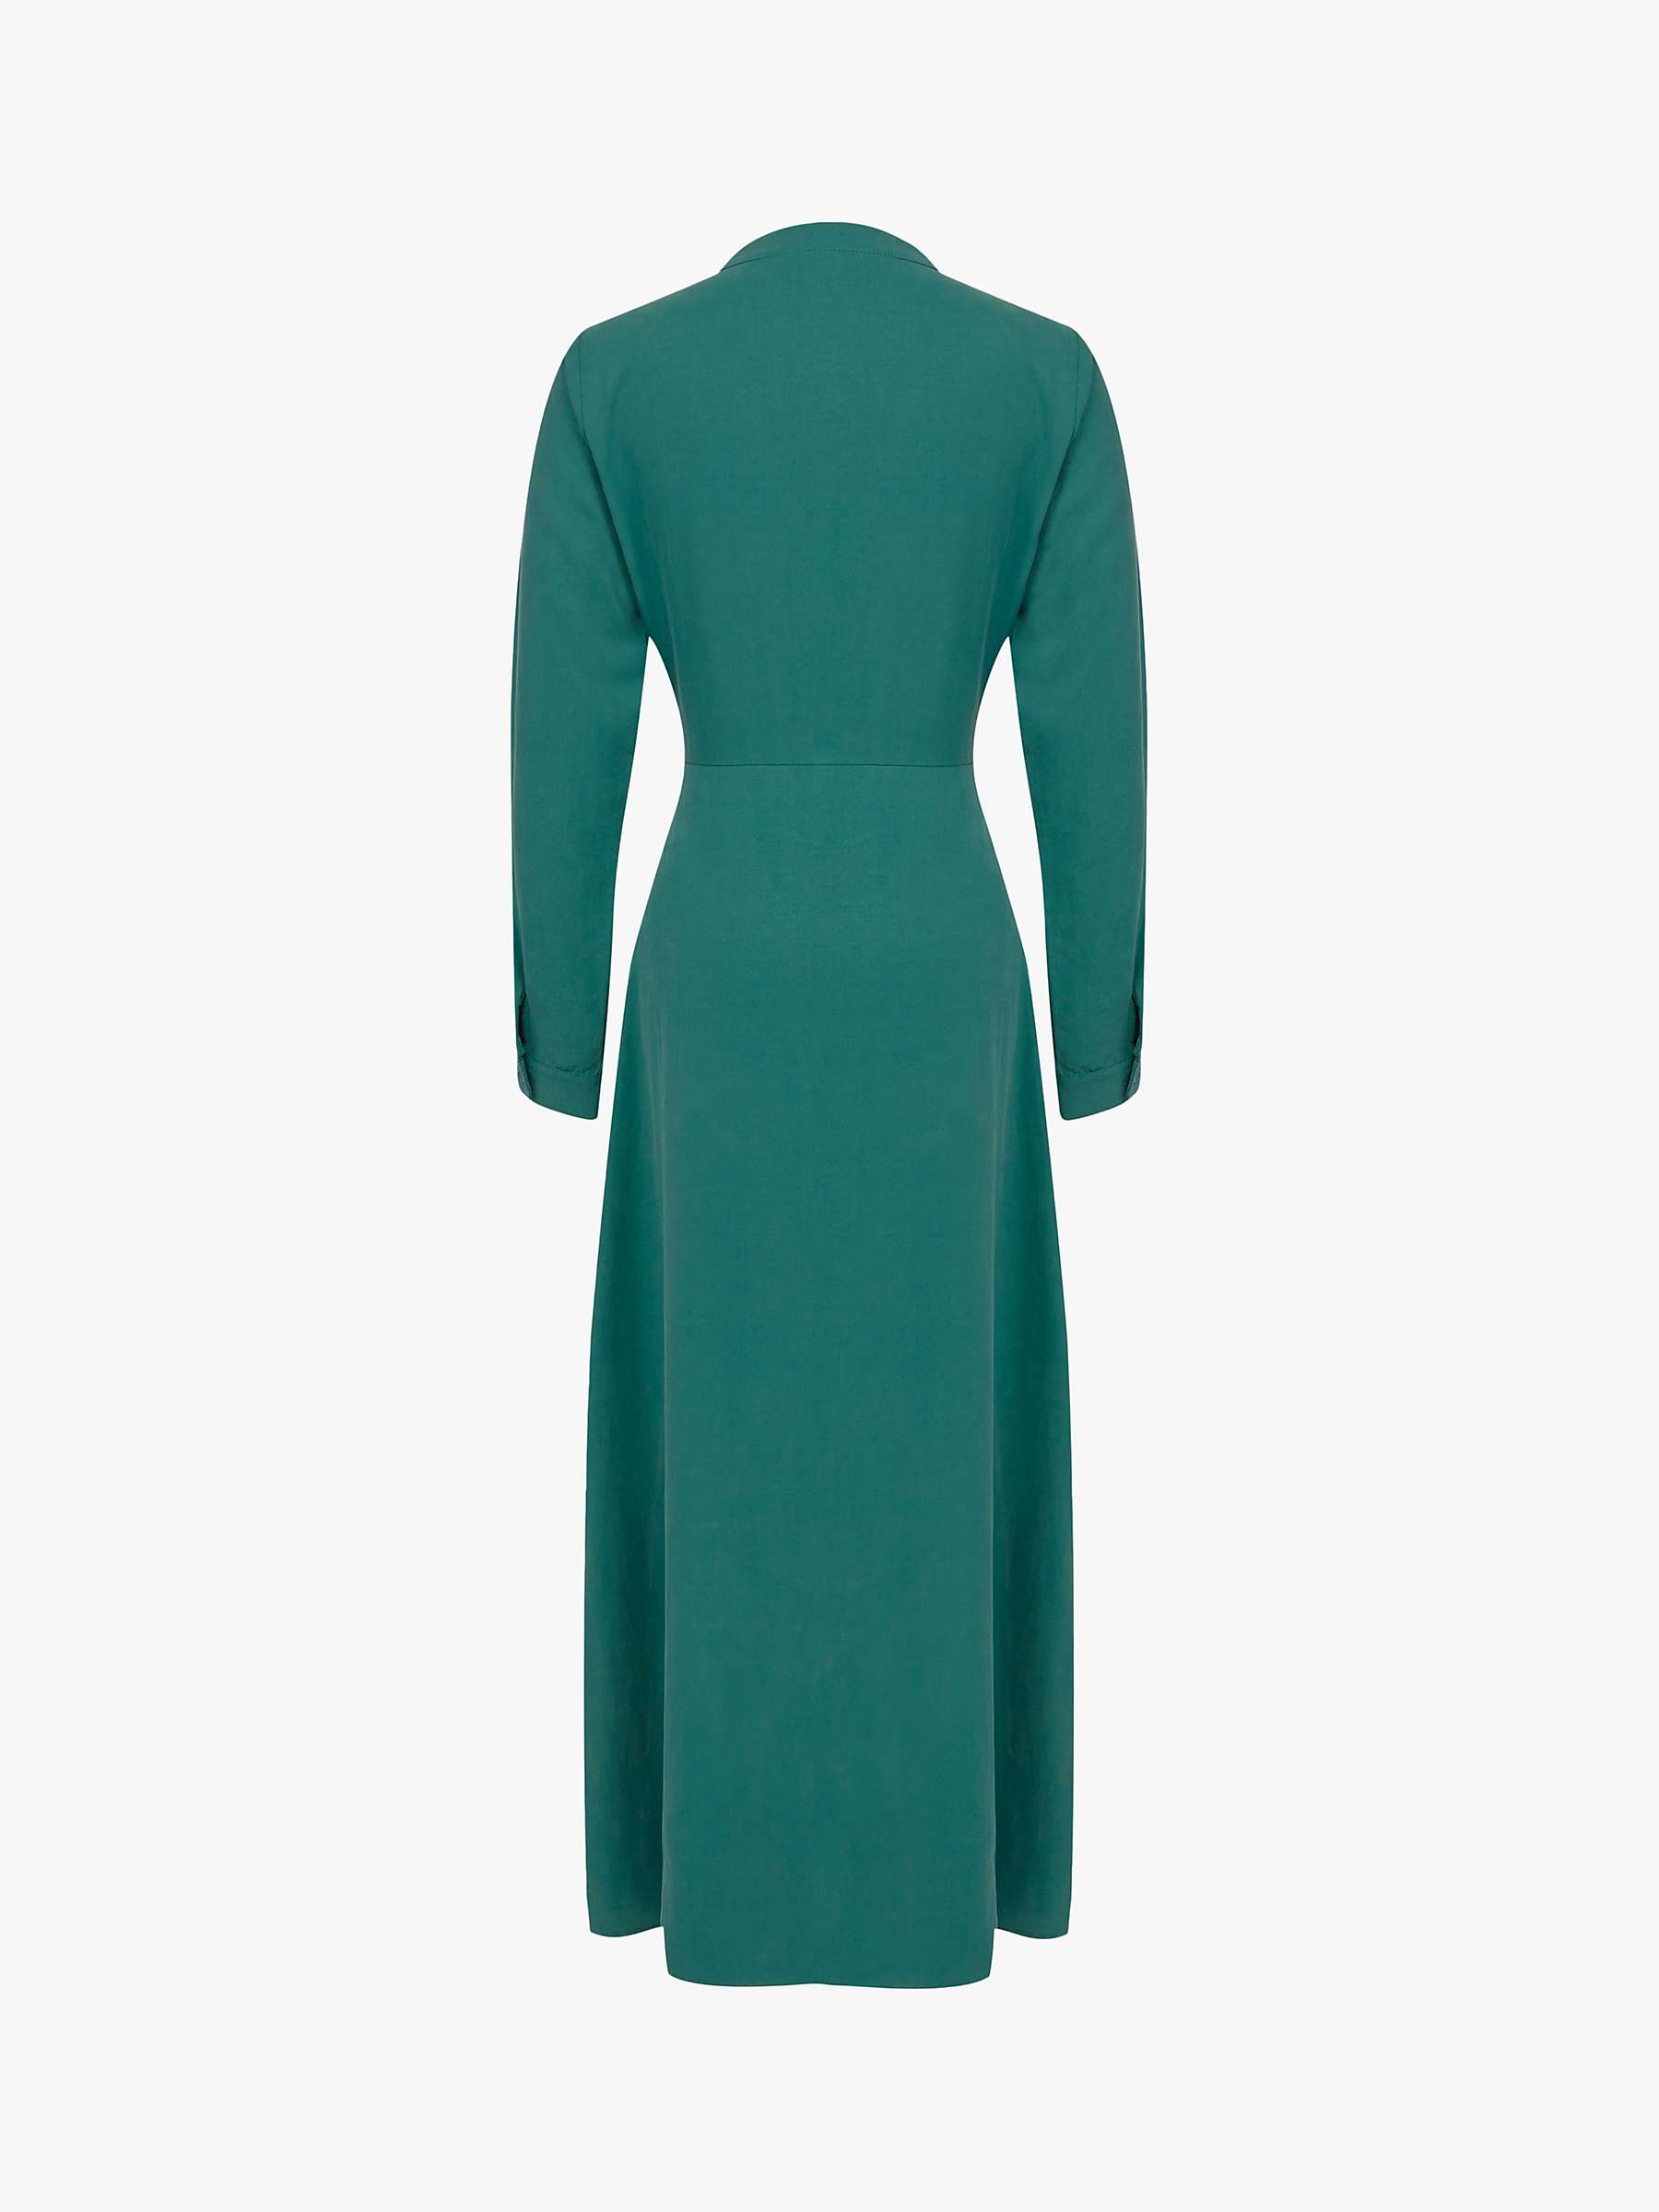 Buy Celtic & Co. Tie Lyocell Front Midi Dress, Sea Green Online at johnlewis.com